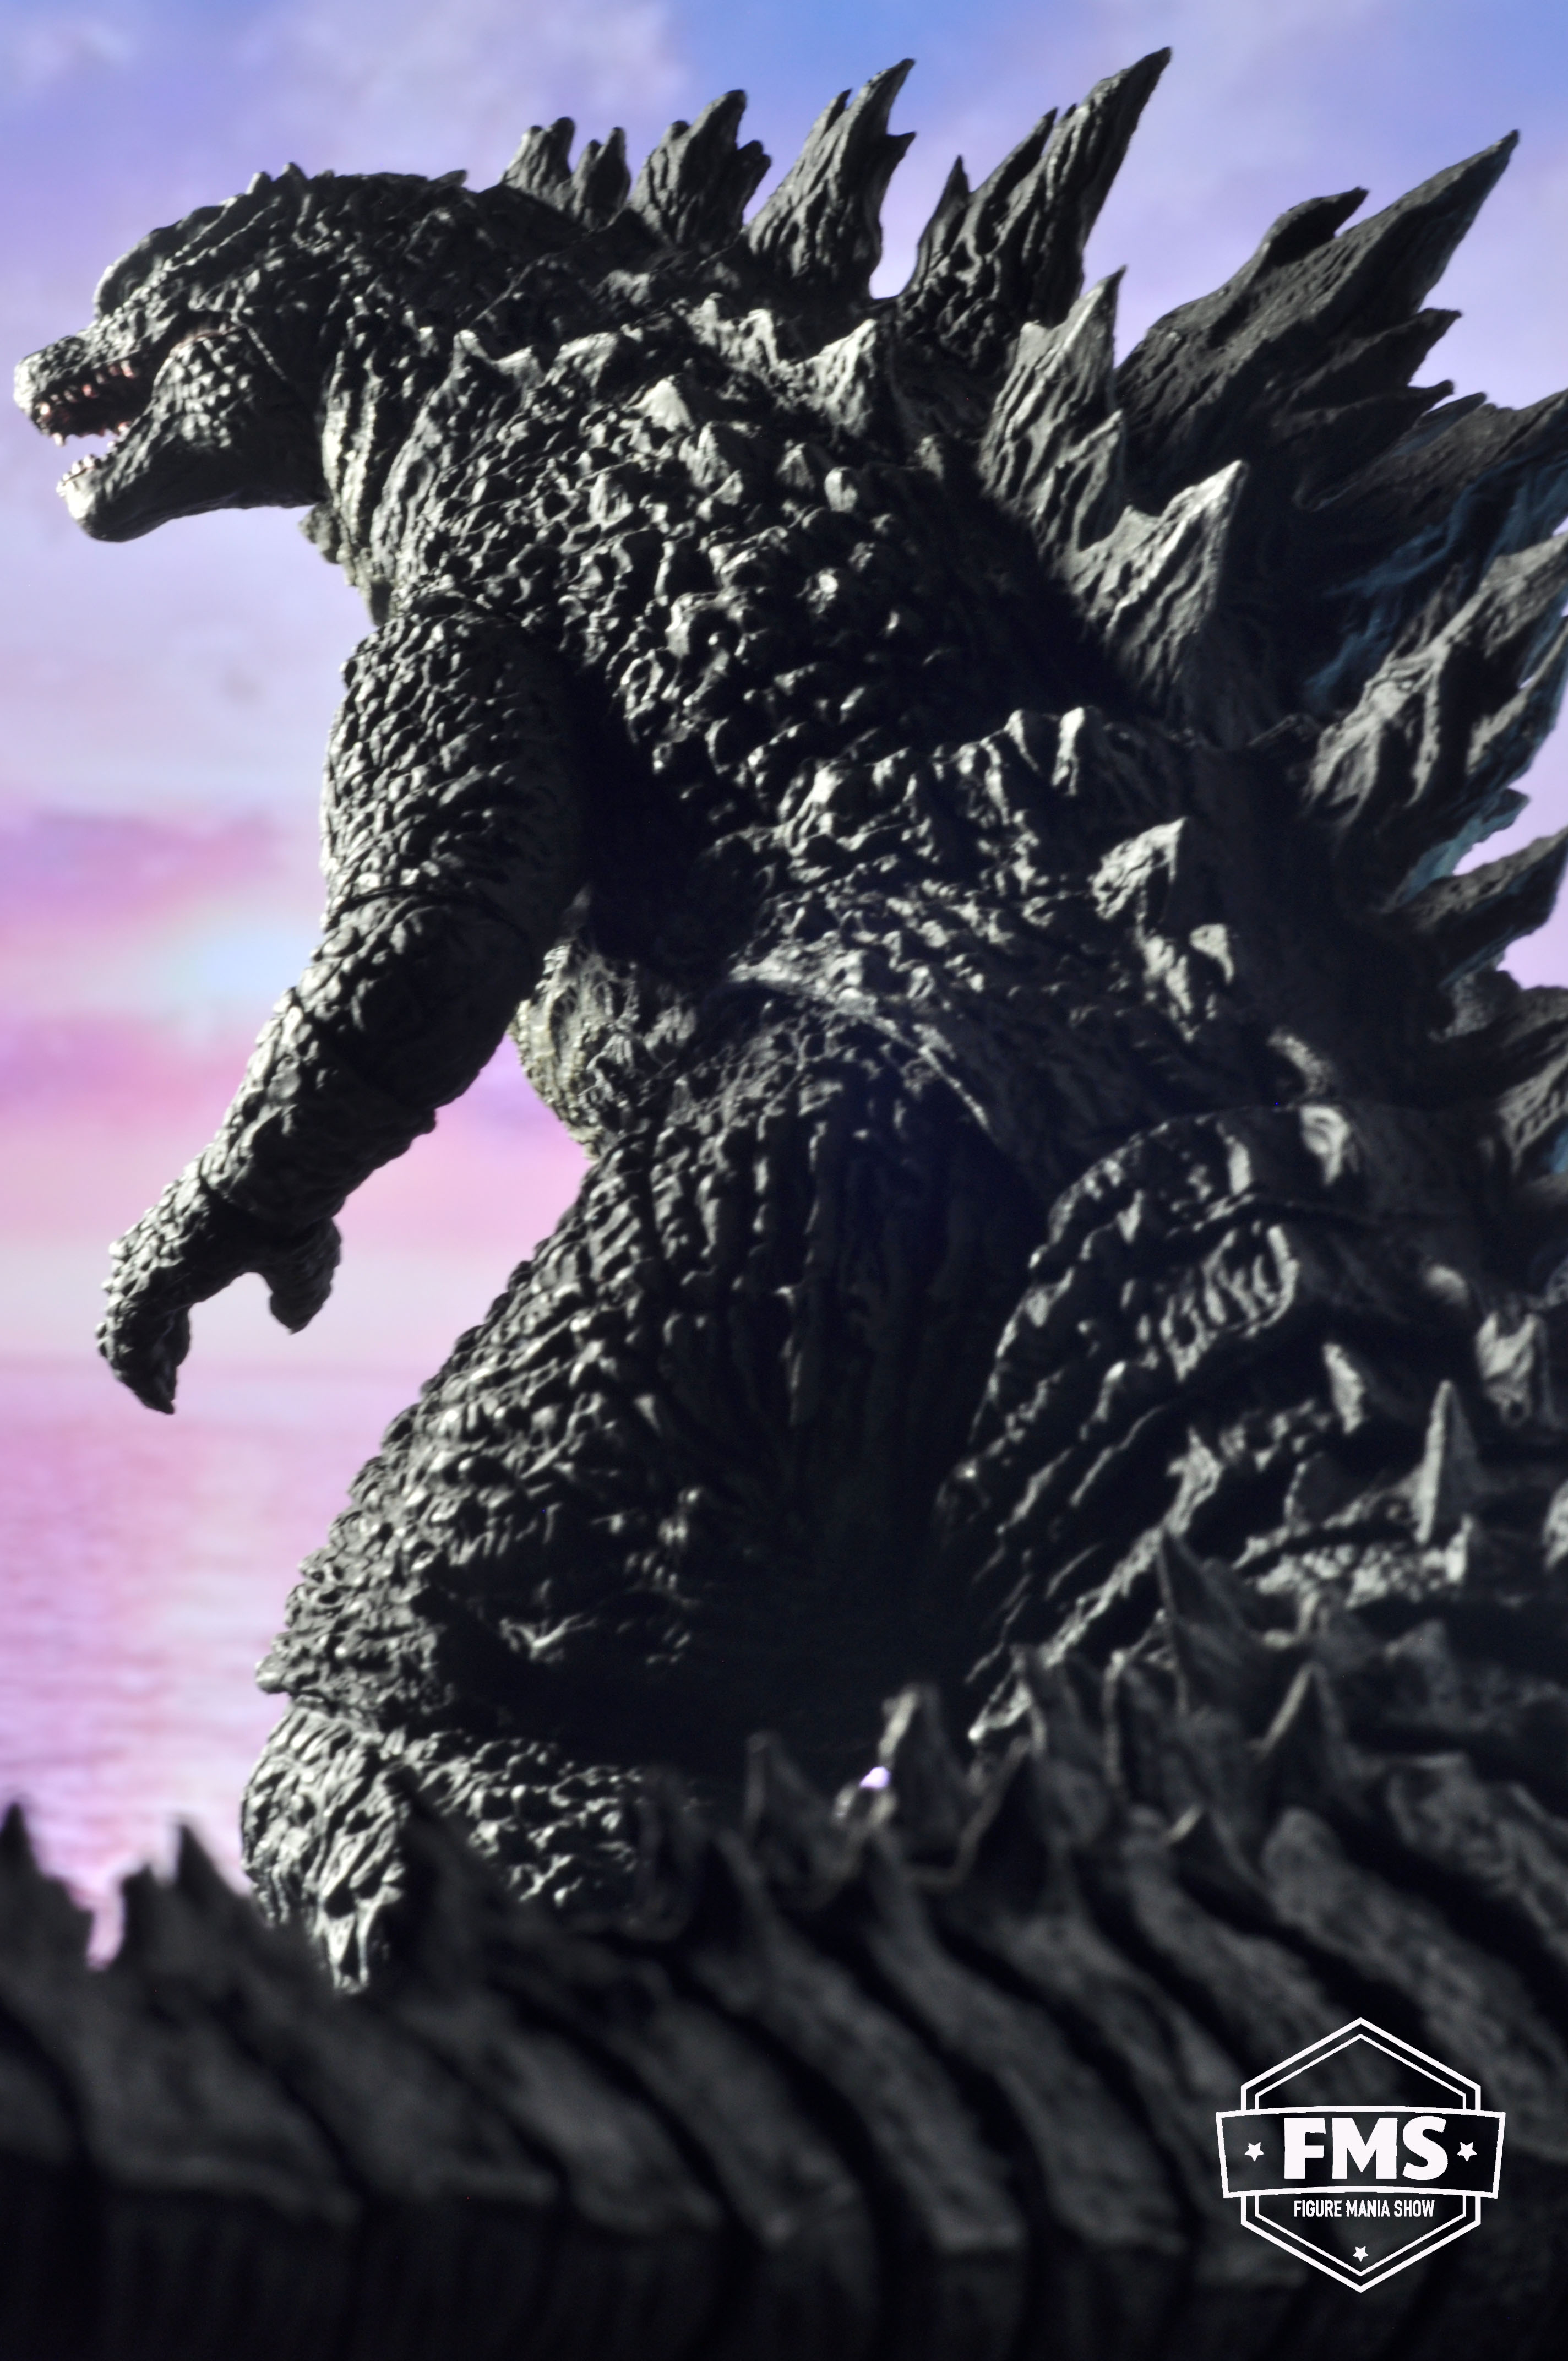 SHMA Godzilla 2014. Inspired by the Monster Planet poster